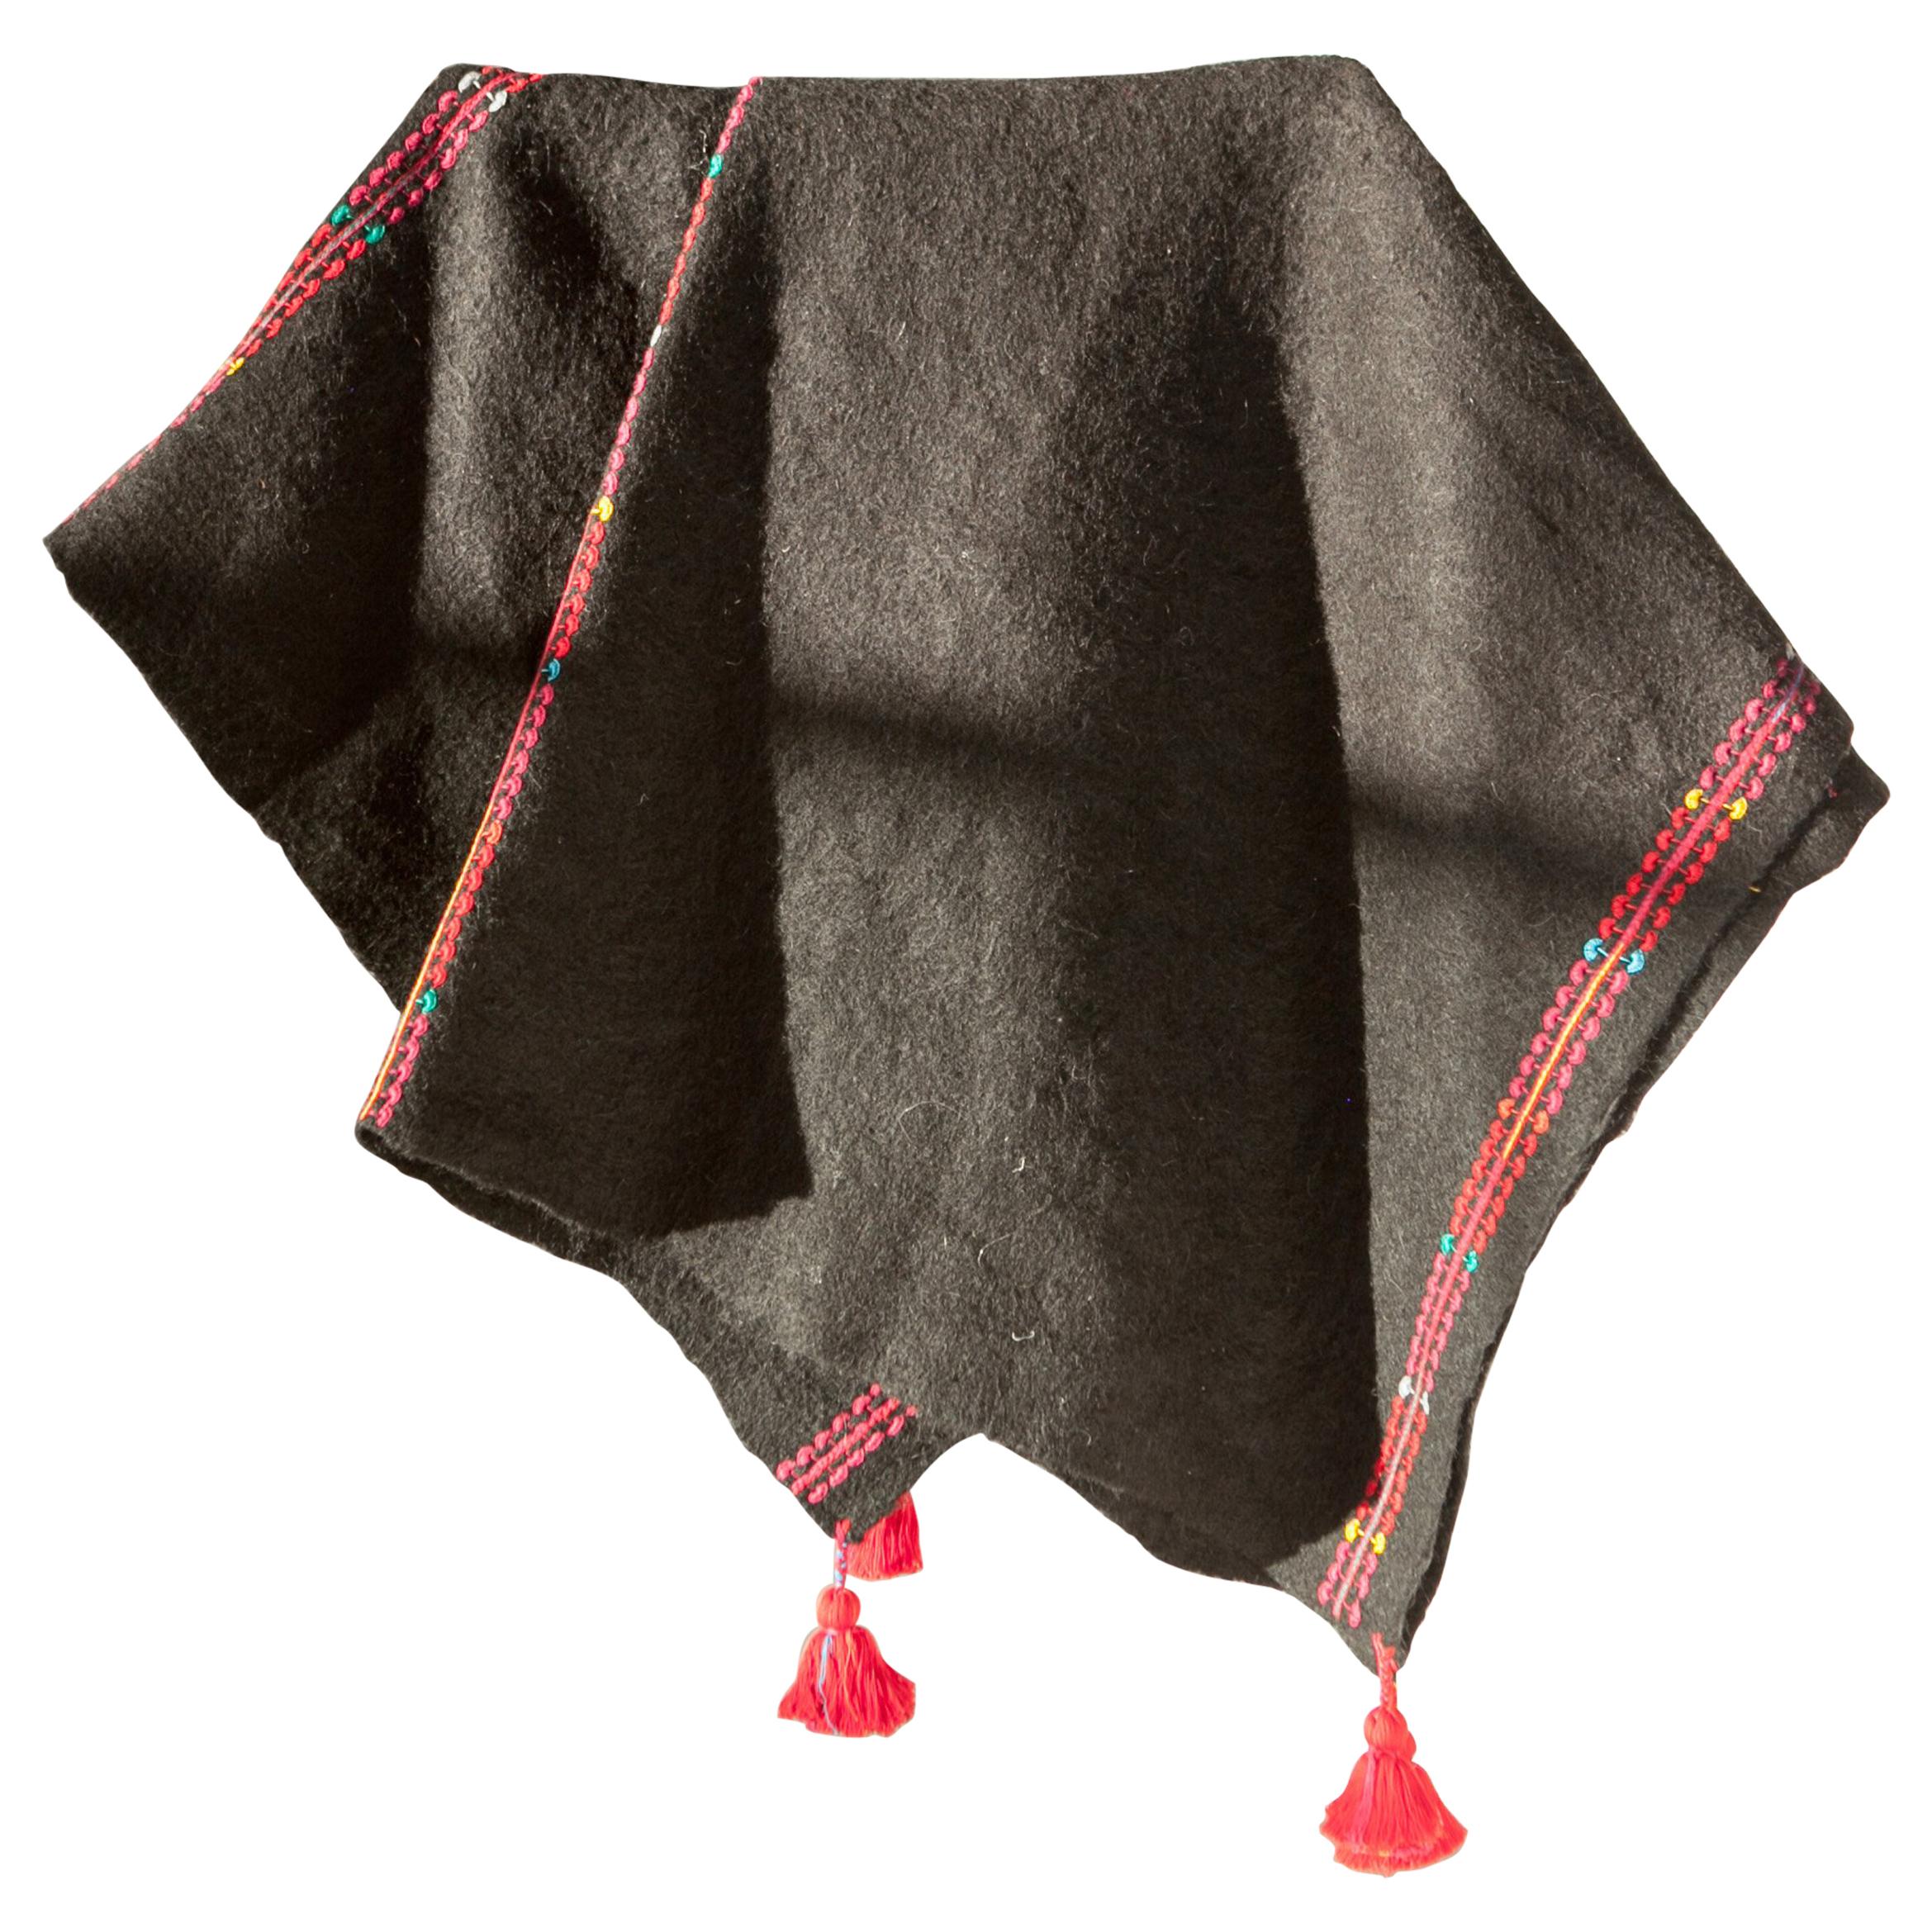 One of a Kind Handwoven Wool Throw in Black with Red Tassels, in Stock